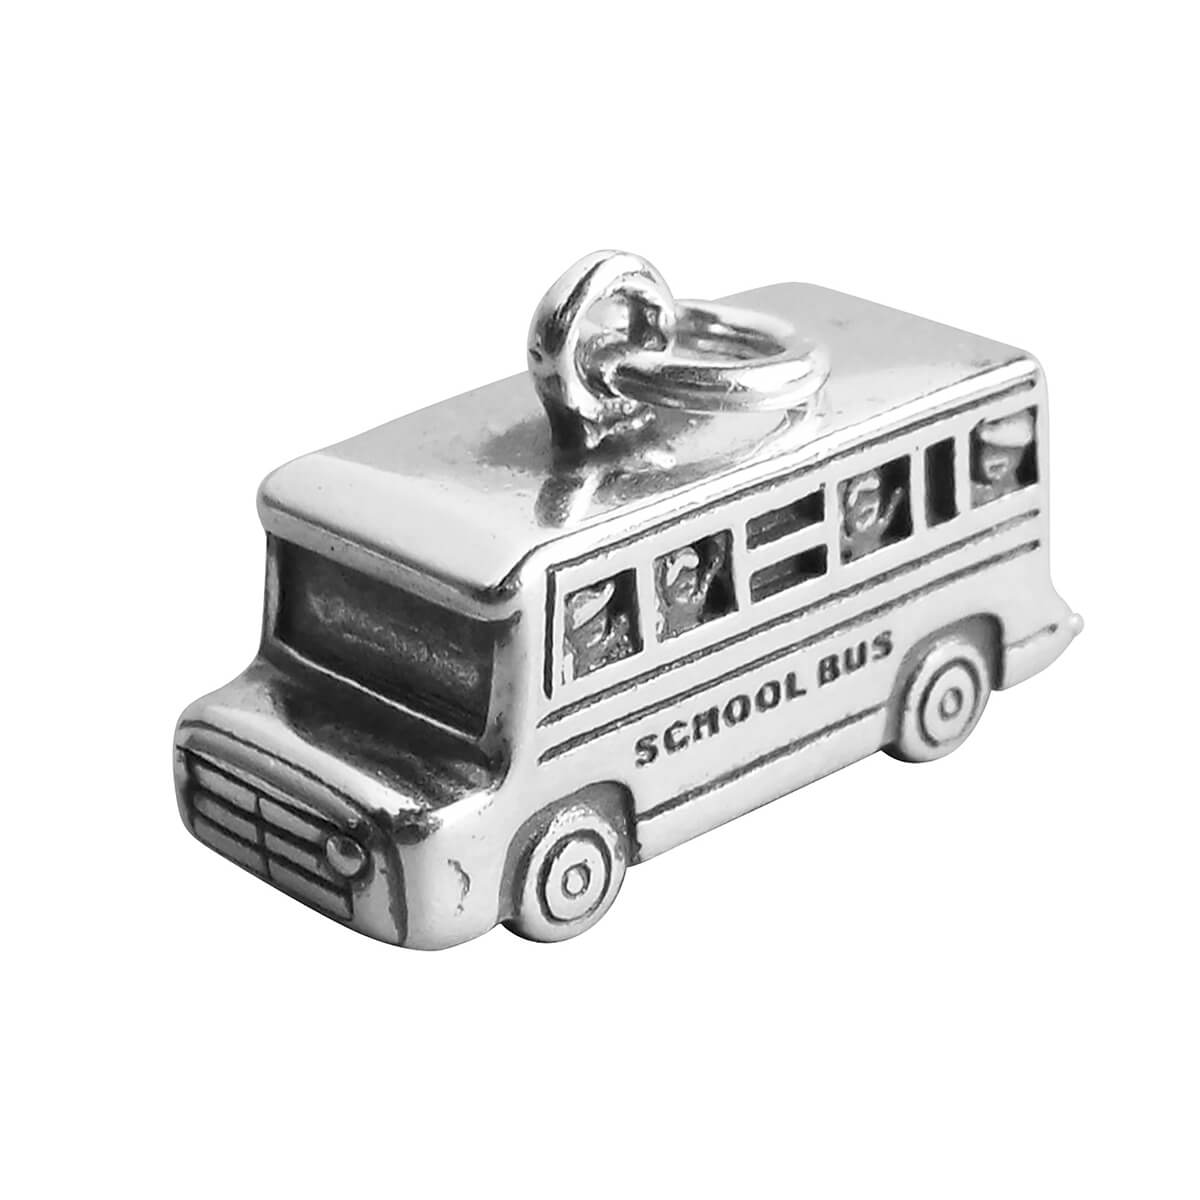 School Bus Charm in 925 Sterling Silver Pendant from Charmarama online charm shop